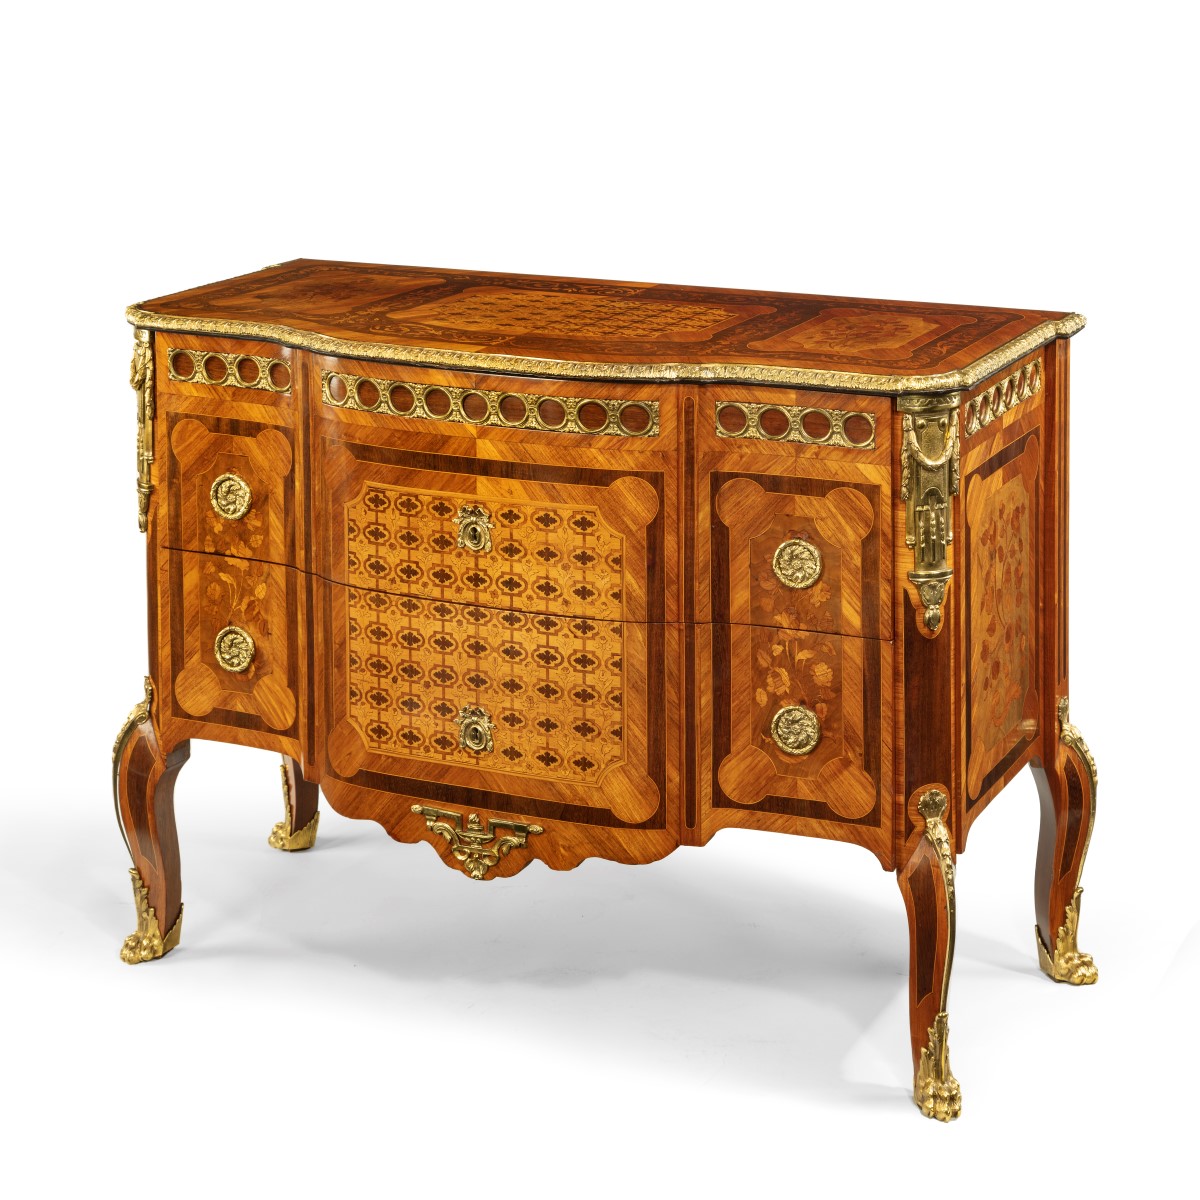 A French kingwood marquetery commode,